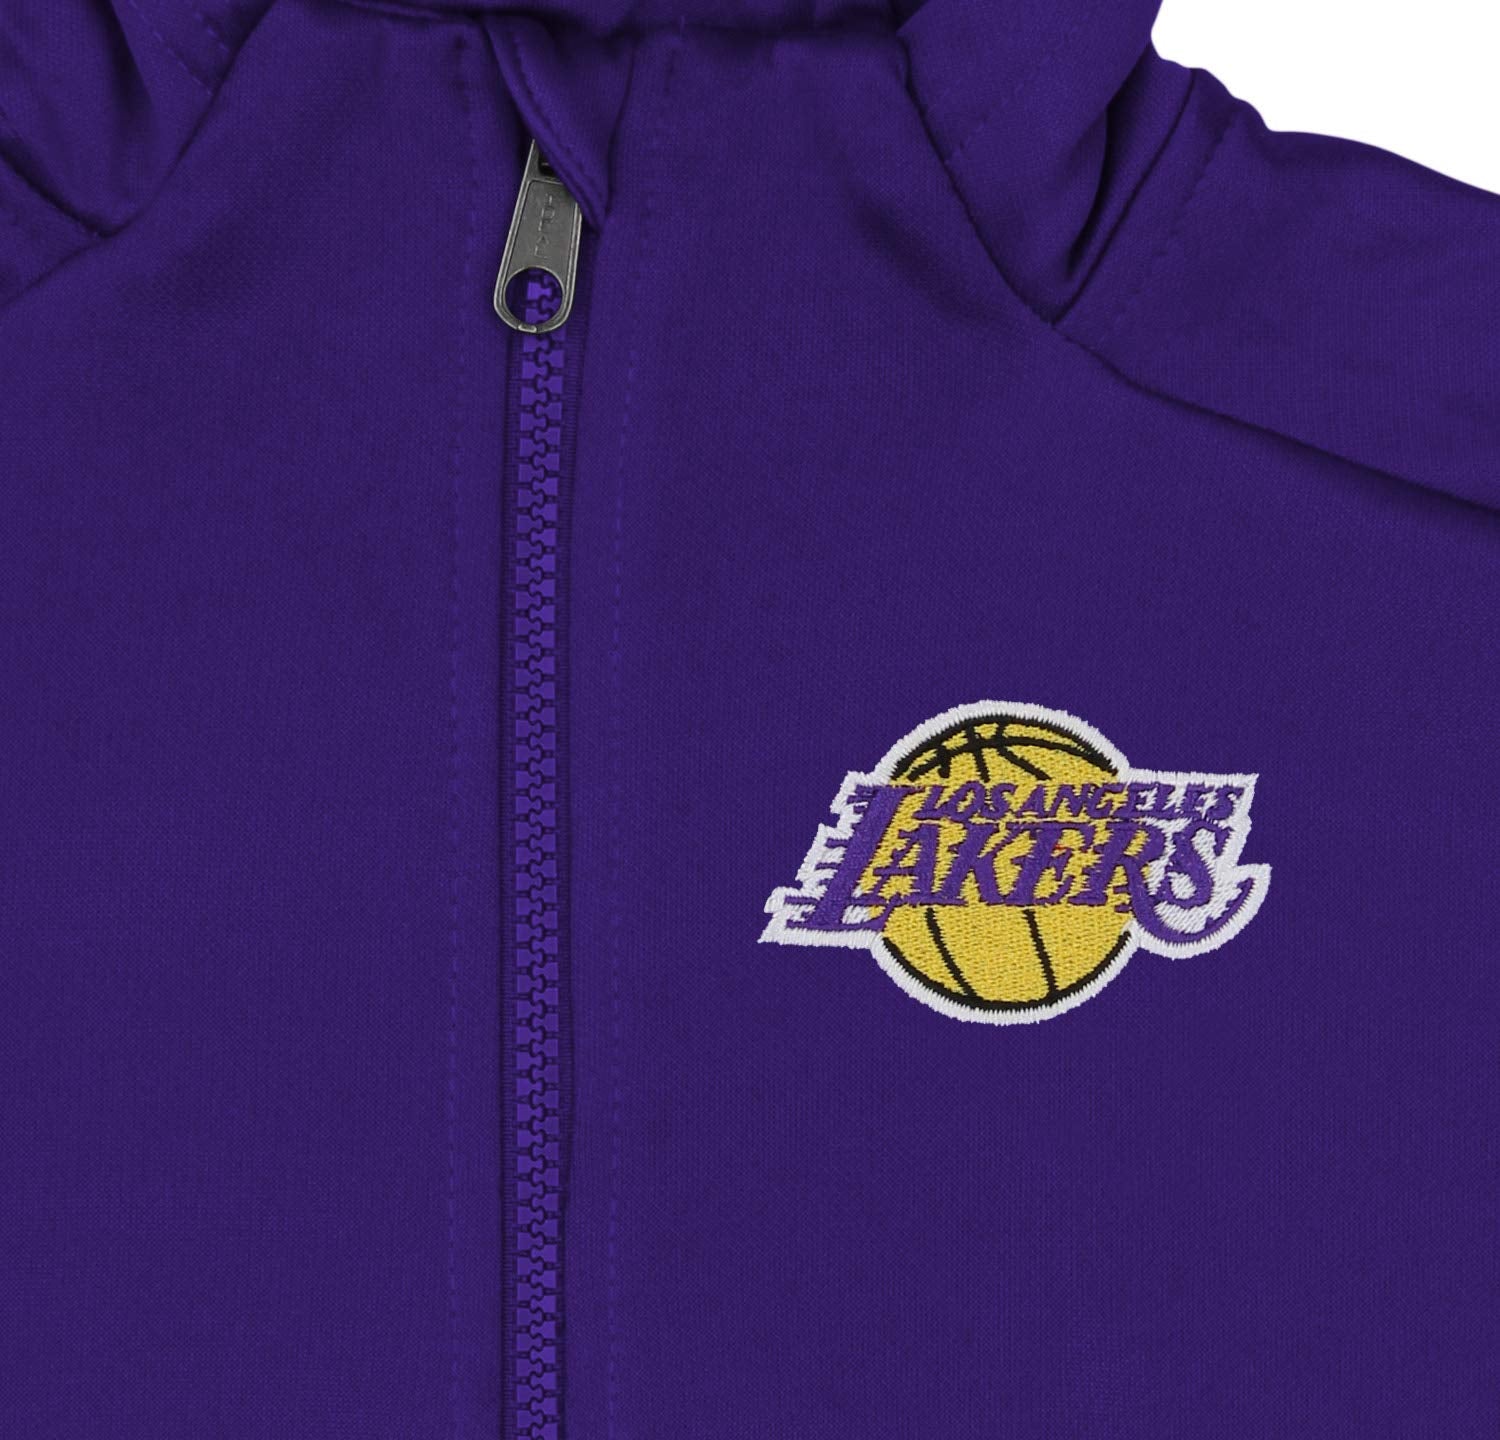  Outerstuff Los Angeles Lakers NBA Kids & Youth Boys